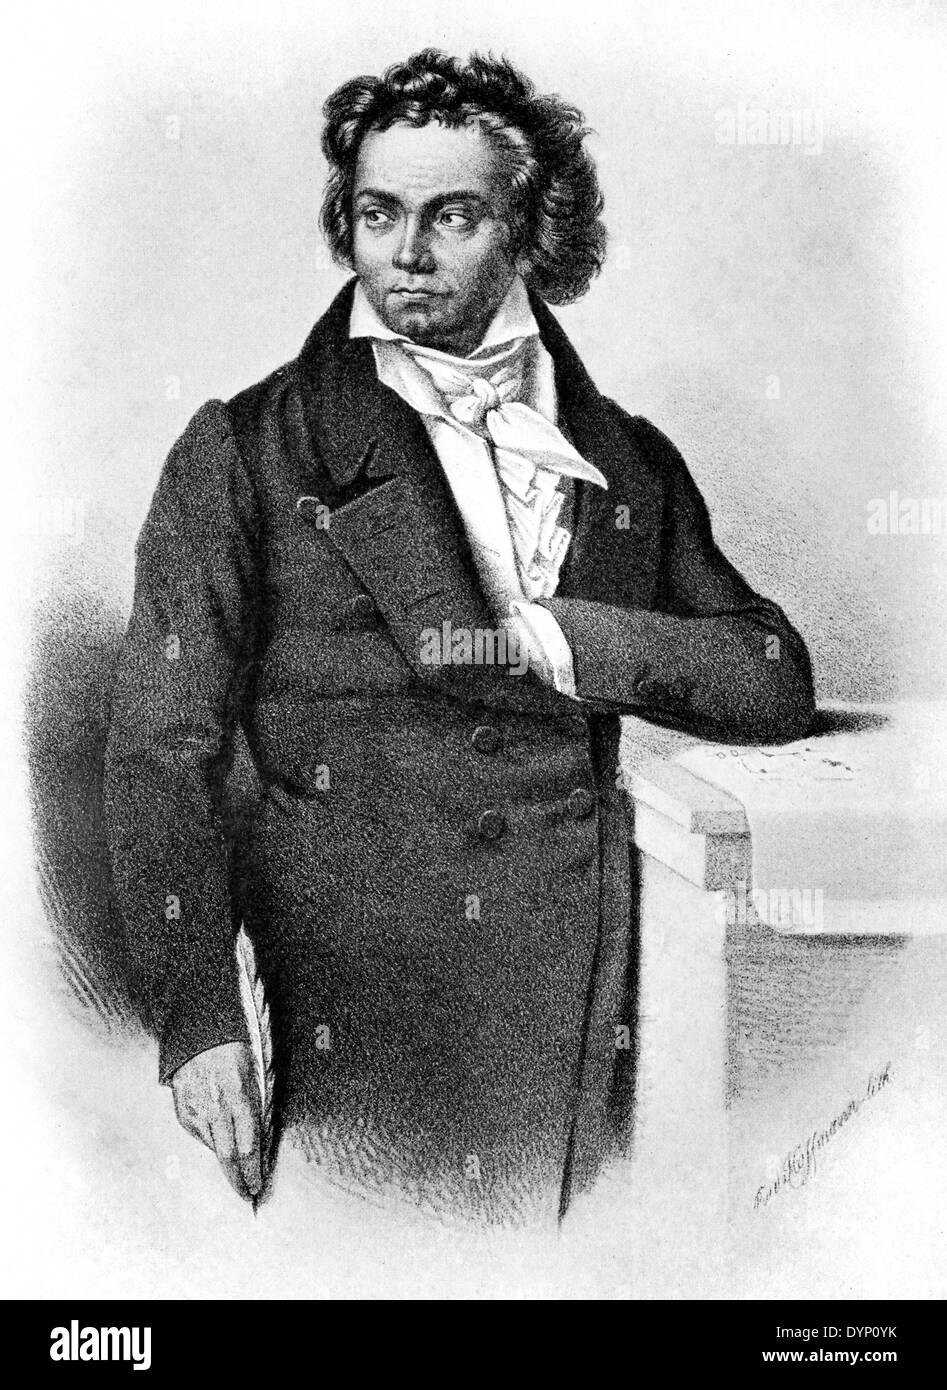 Ludwig van Beethoven (1770-1827), German composer and pianist, illustration from Soviet encyclopedia, 1927 Stock Photo